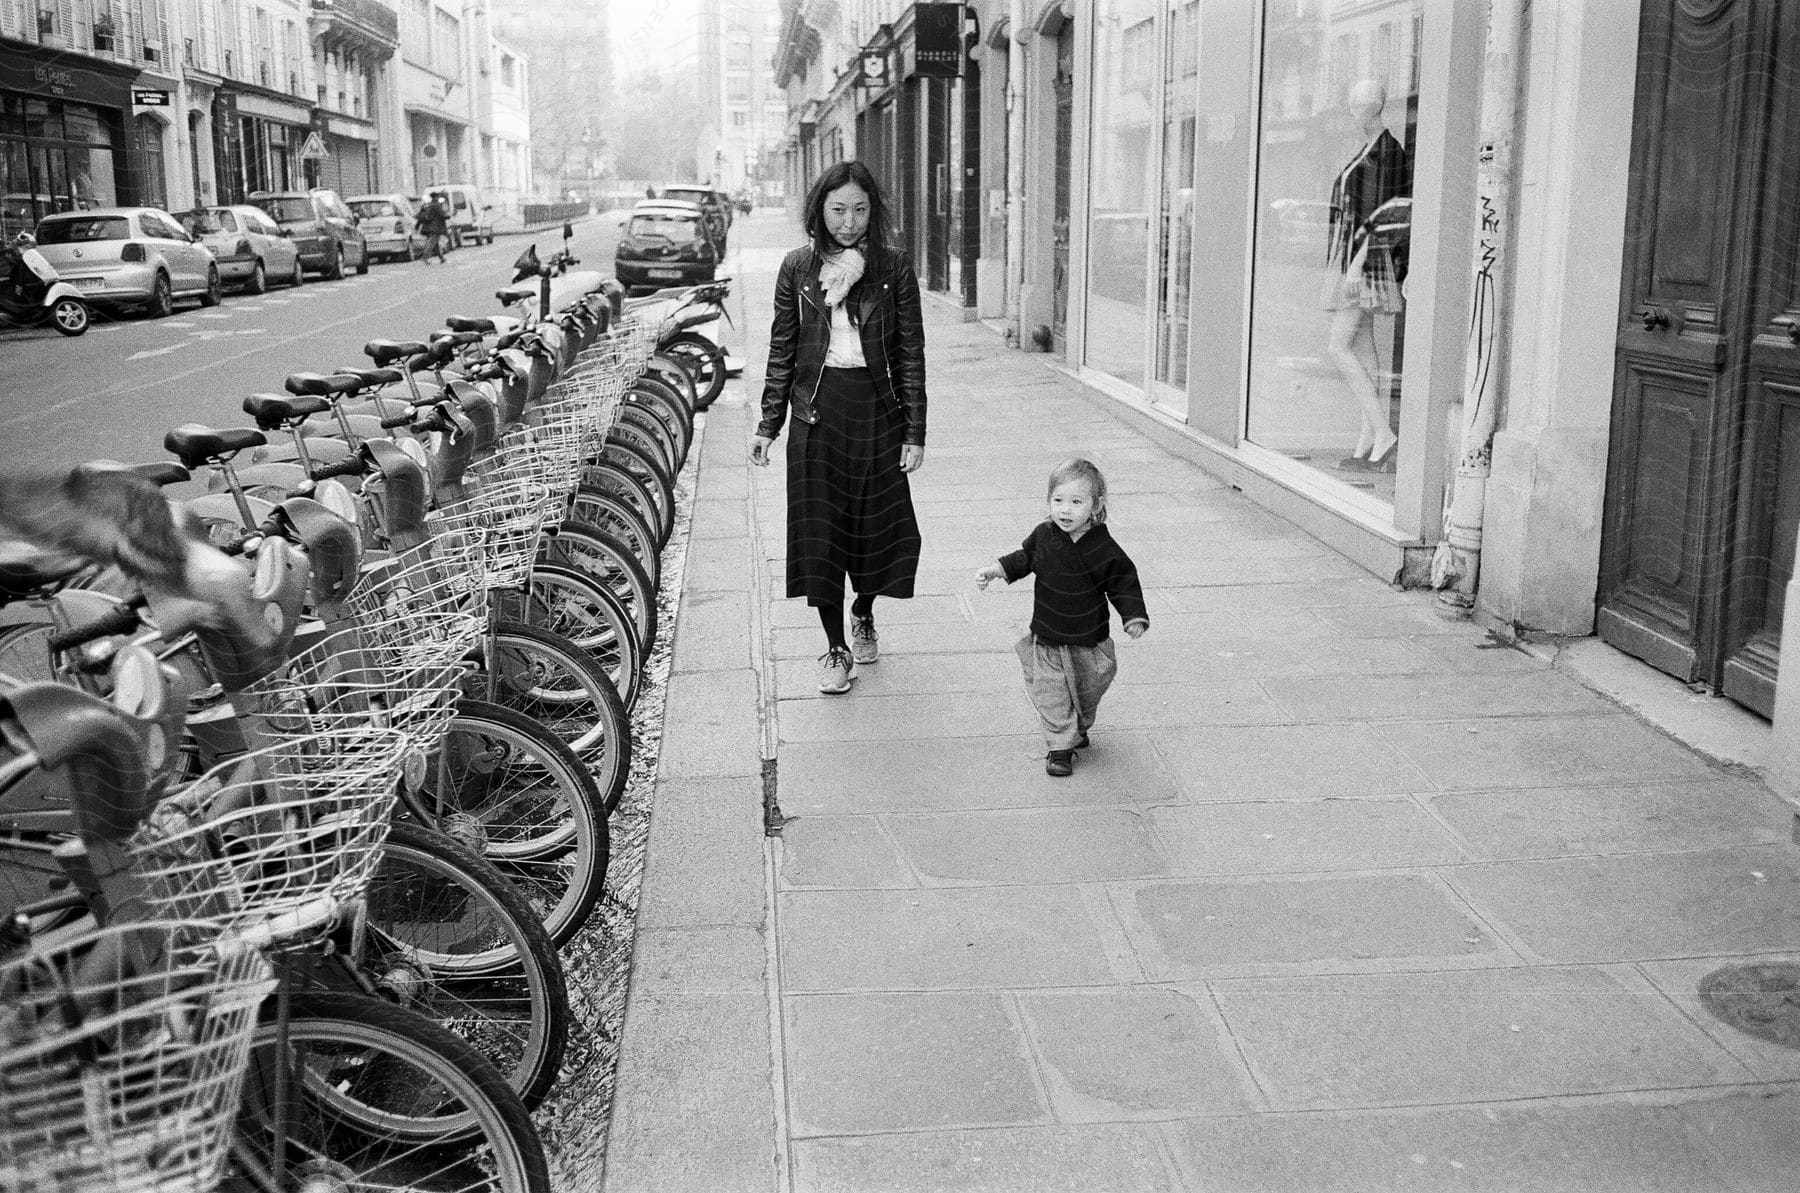 A woman strolling down a deserted street, accompanied by a toddler on the sidewalk, surrounded by a row of parked bicycles along the roadside.